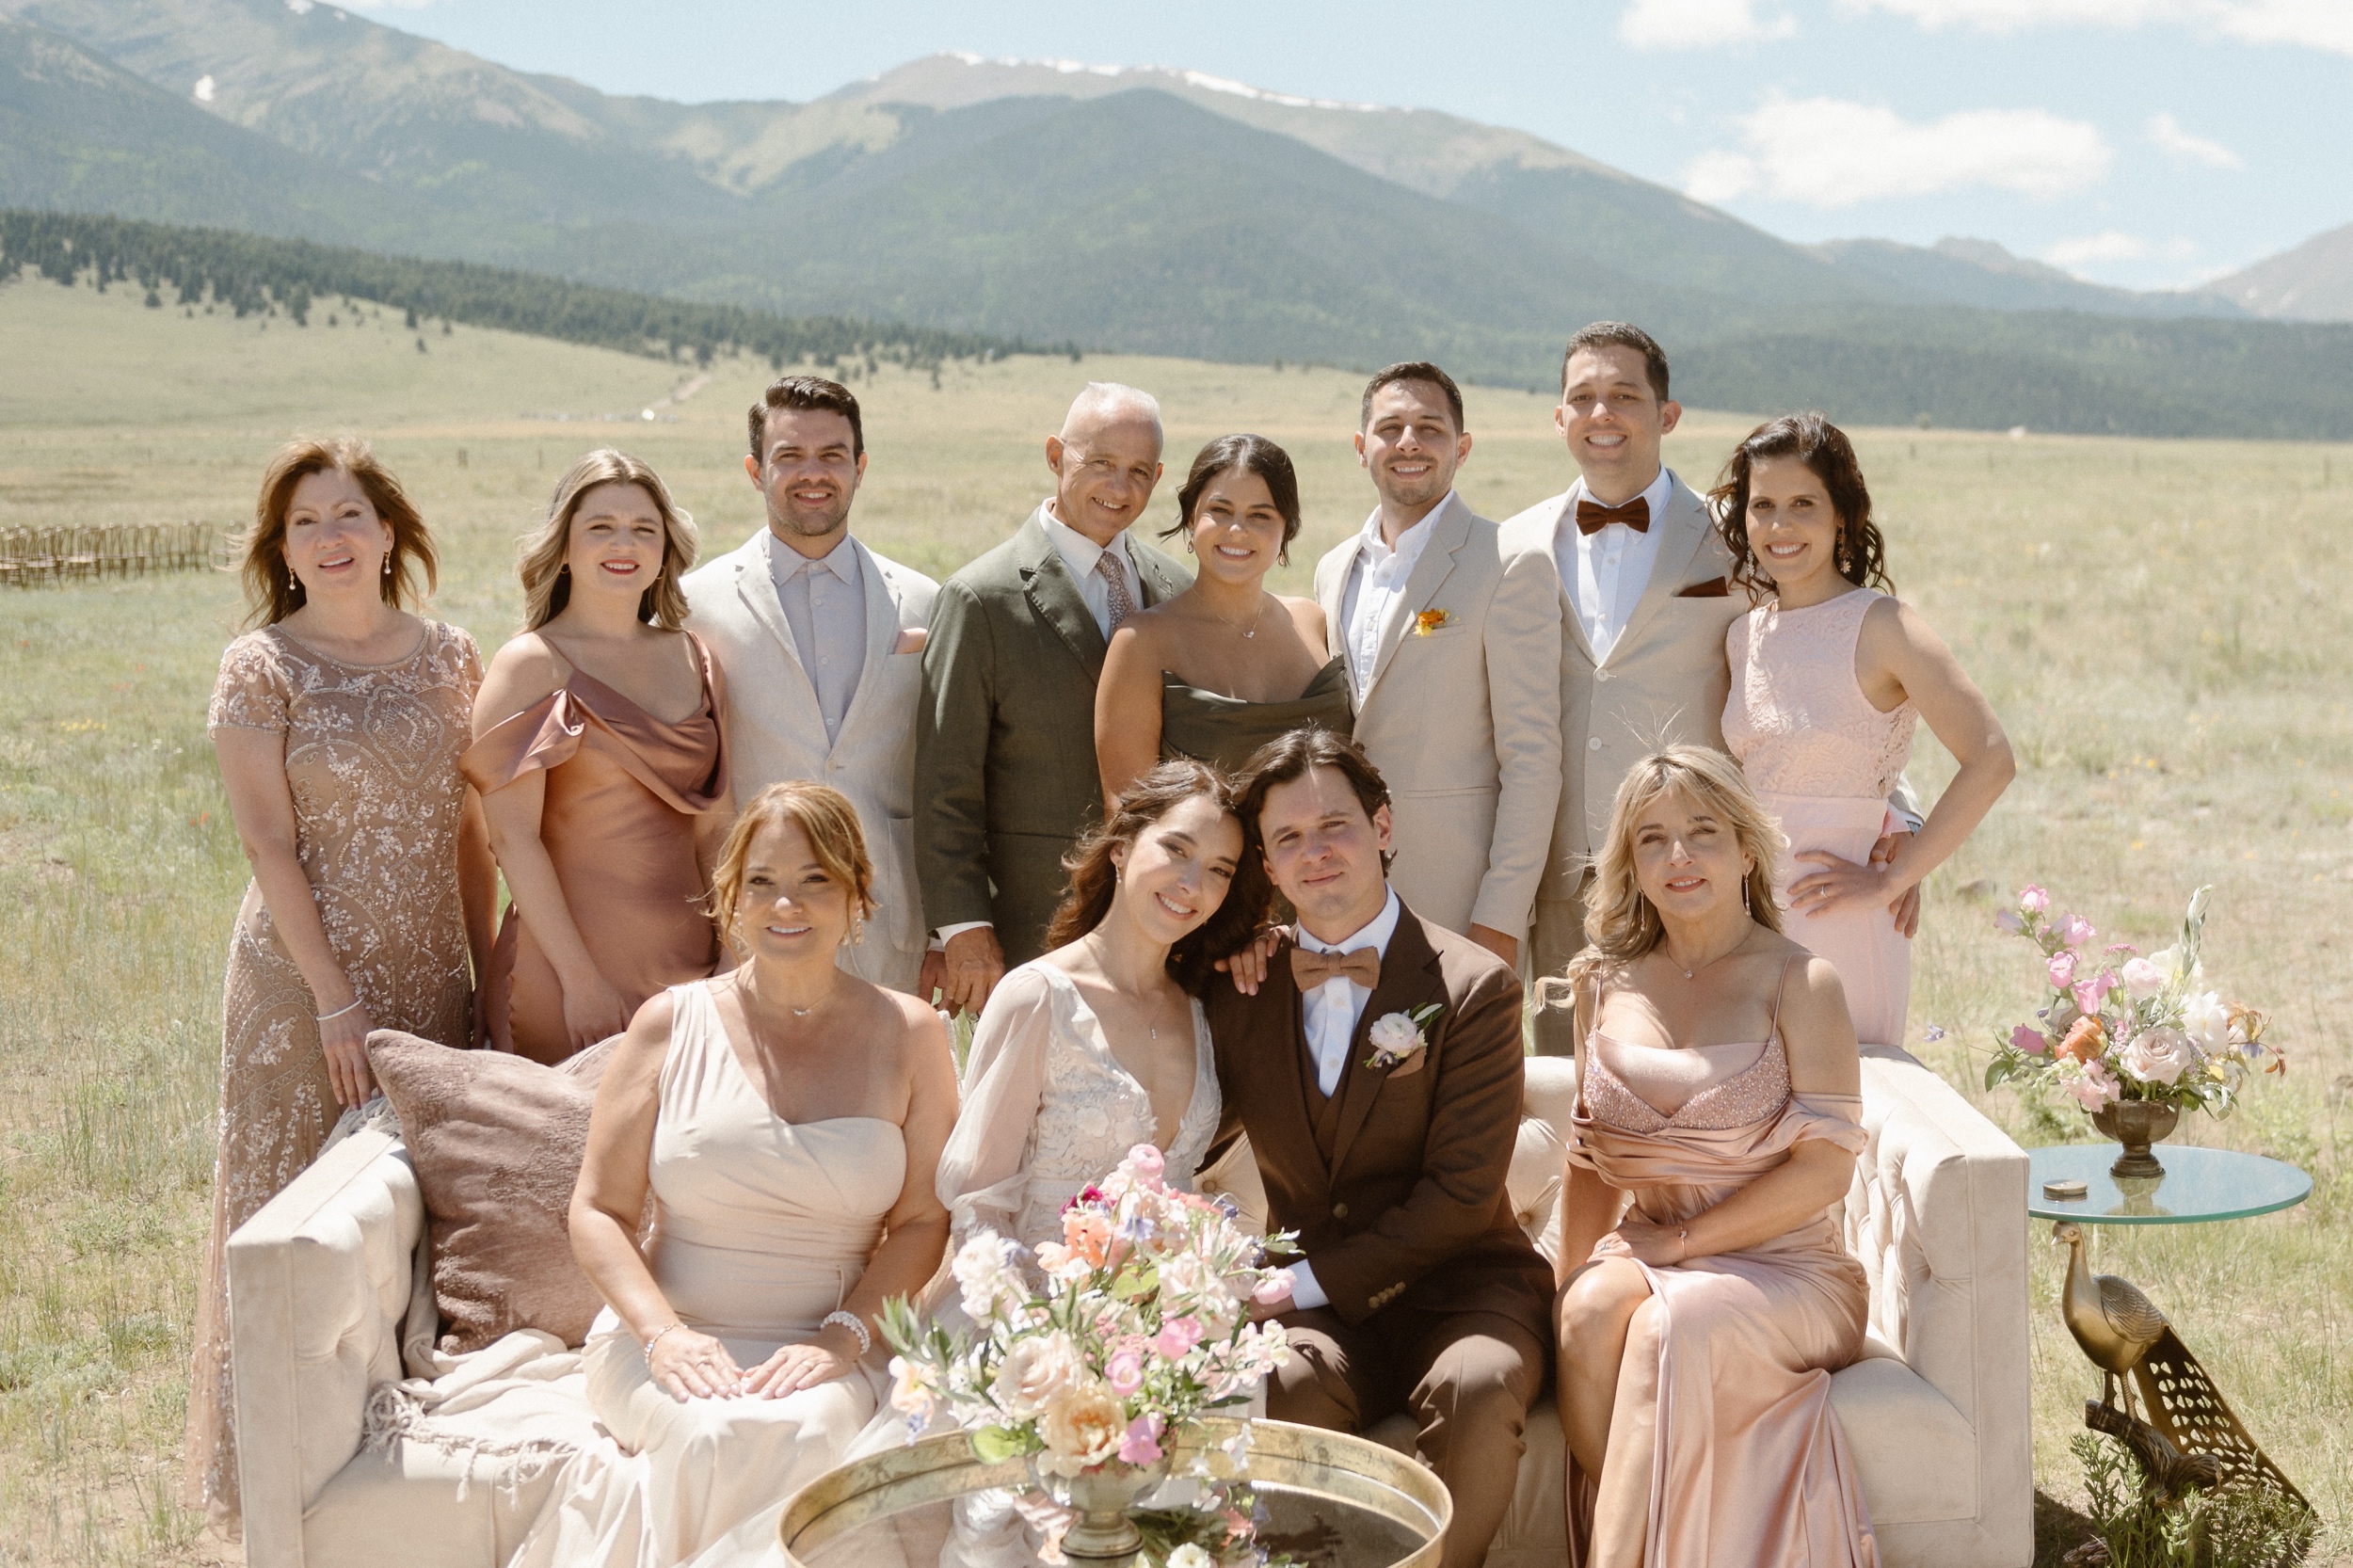 A group photo of a bride and groom's immediate families while they pose in a grassy field with mountains in the background. Photo by Colorado wedding photographer Ashley Joyce.